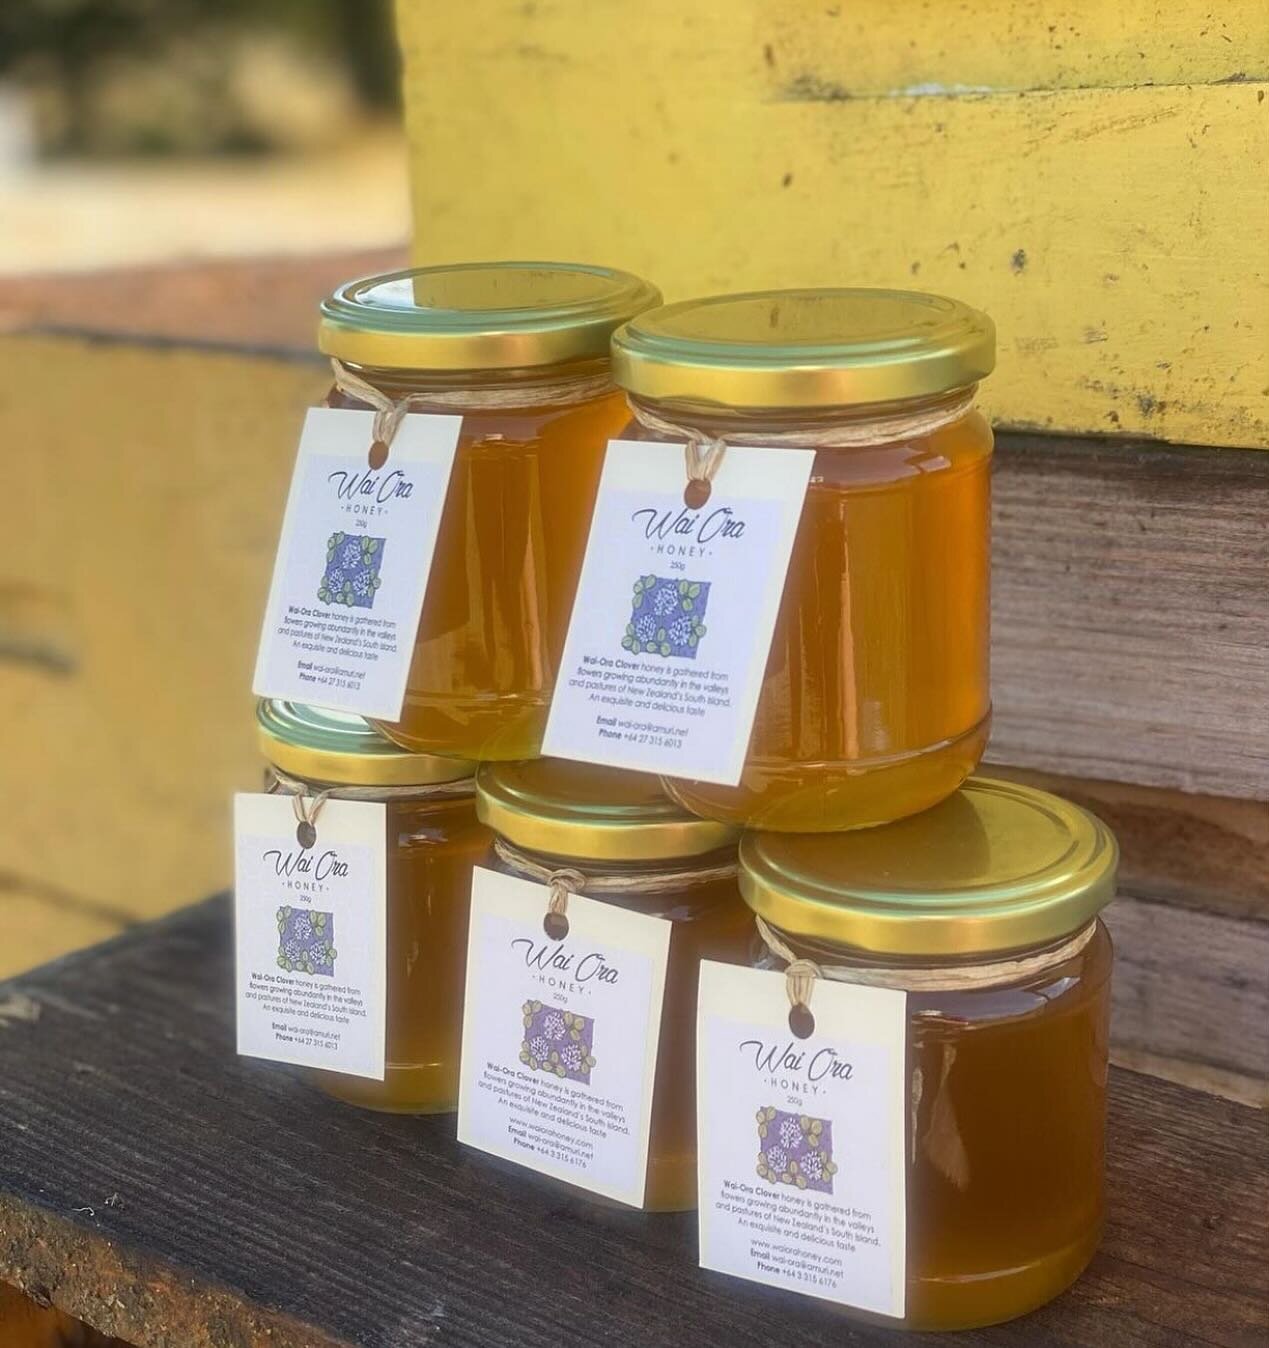 New seasons Raw Clover Honey from @waiorahoney available from tomorrow so come and see the team on the riverside near the big house.

9am - 1pm 🐝🍯